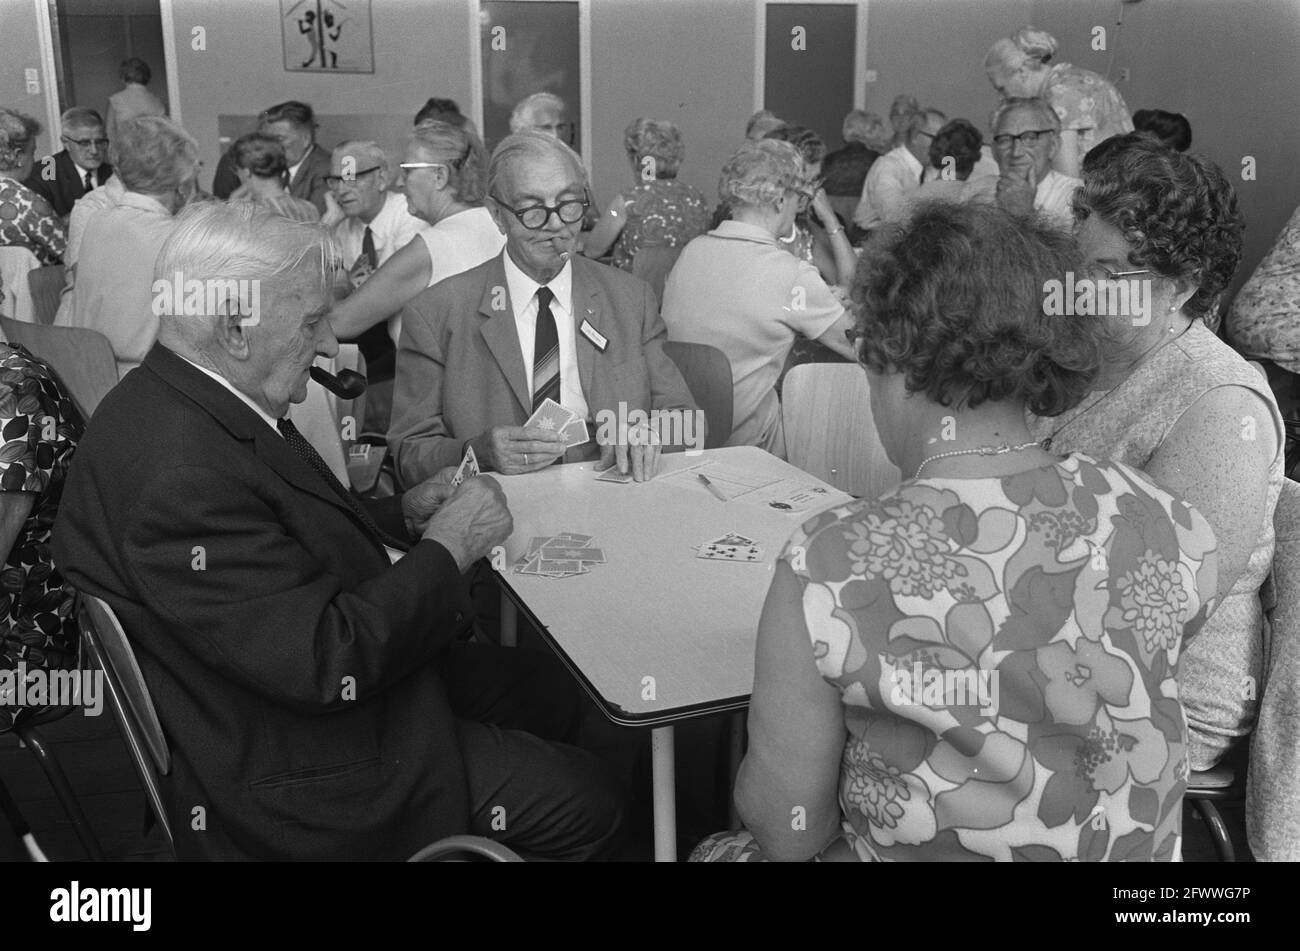 Commission HP: UVV senior citizens club in building Reigersburg Amsterdam-East; cards for the elderly, 25 August 1970, BOARDING, CARDS, The Netherlands, 20th century press agency photo, news to remember, documentary, historic photography 1945-1990, visual stories, human history of the Twentieth Century, capturing moments in time Stock Photo